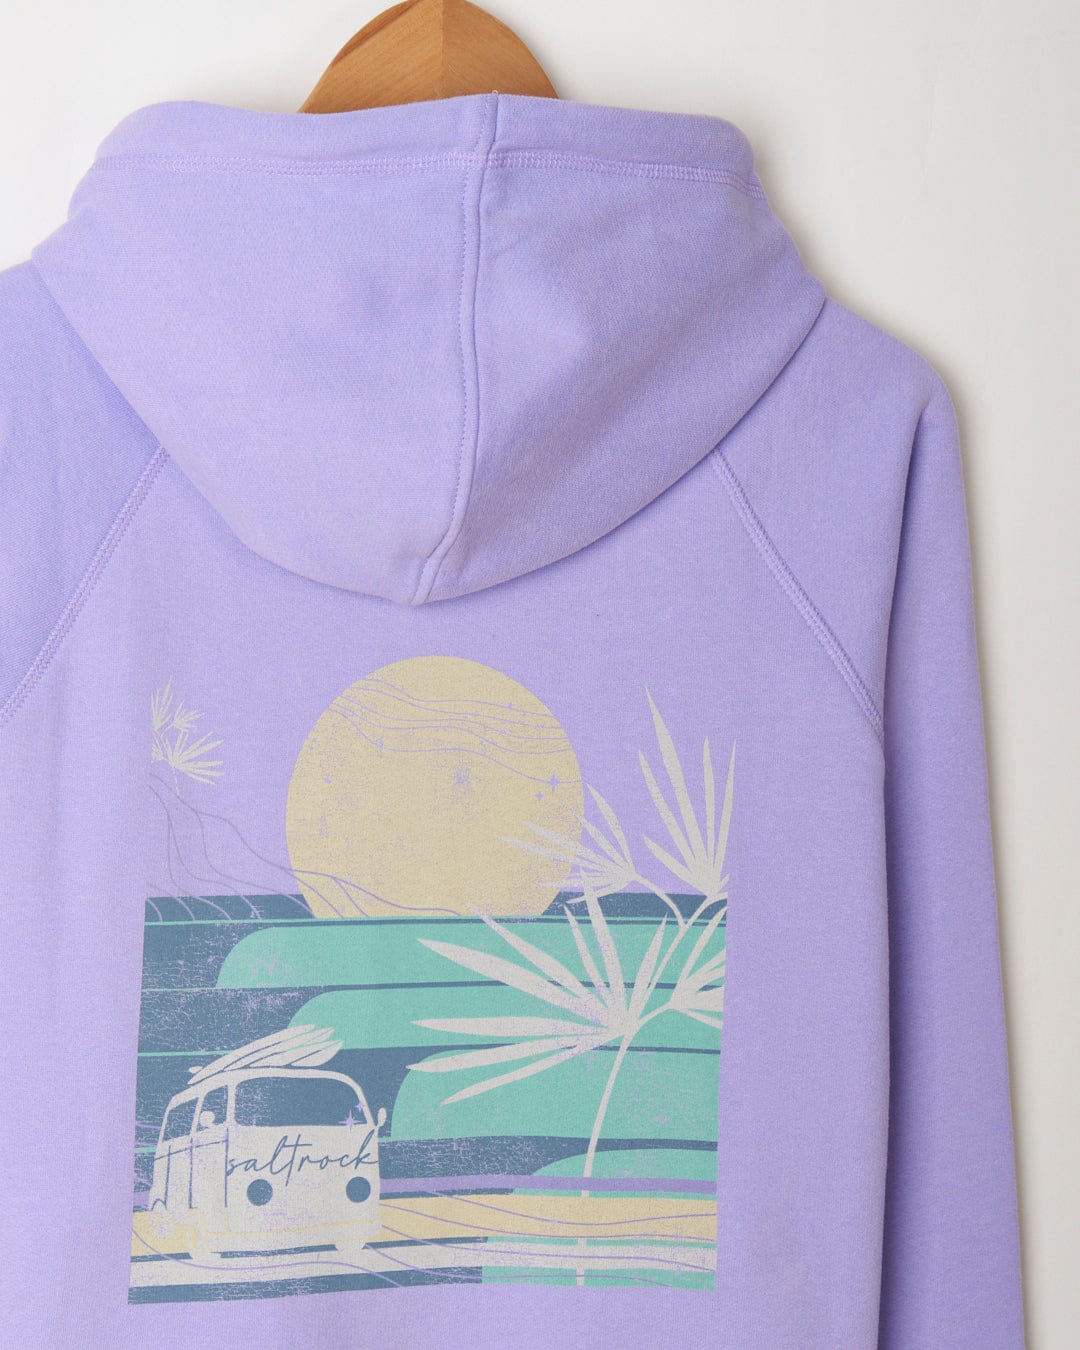 A Saltrock lilac women's zip hoodie with an image of a beach and a van.